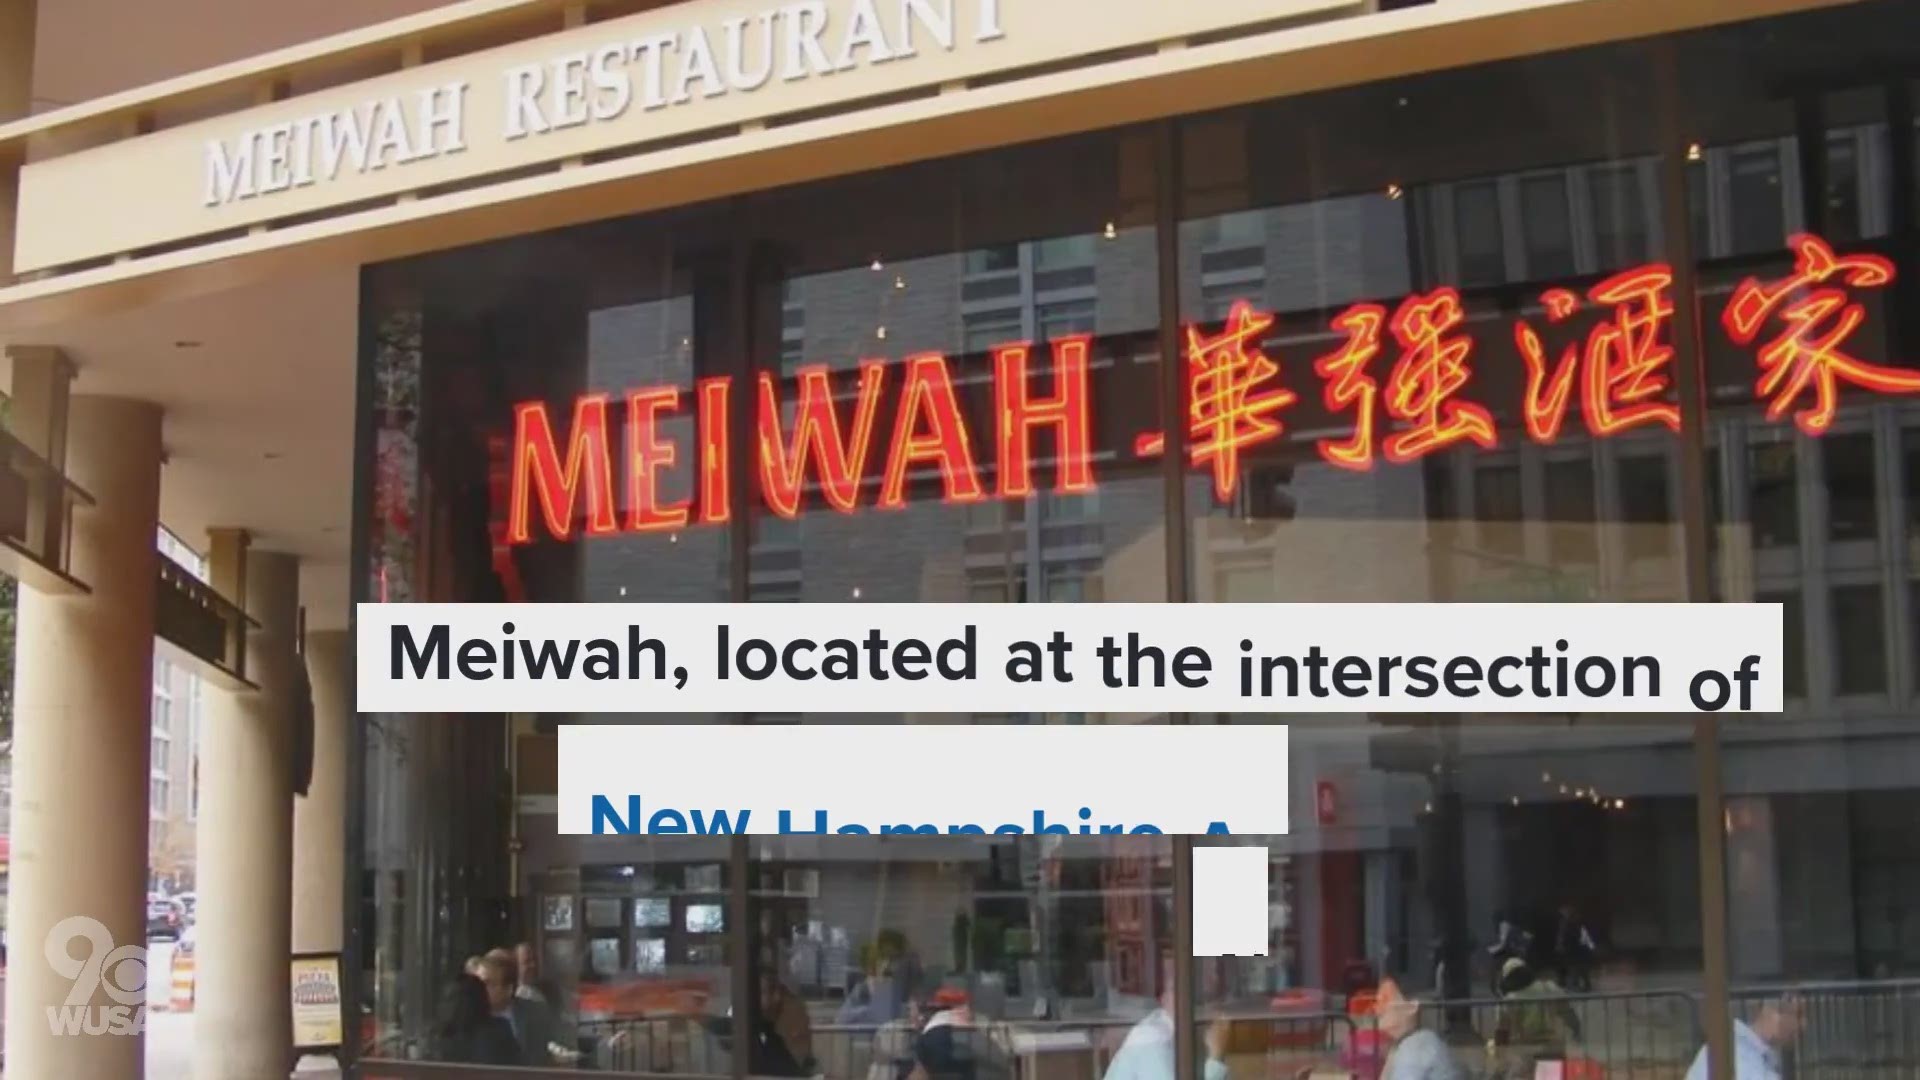 A Washington D.C. institution in the West End, Meiwah, will close after 20 years of serving politicos and high society.